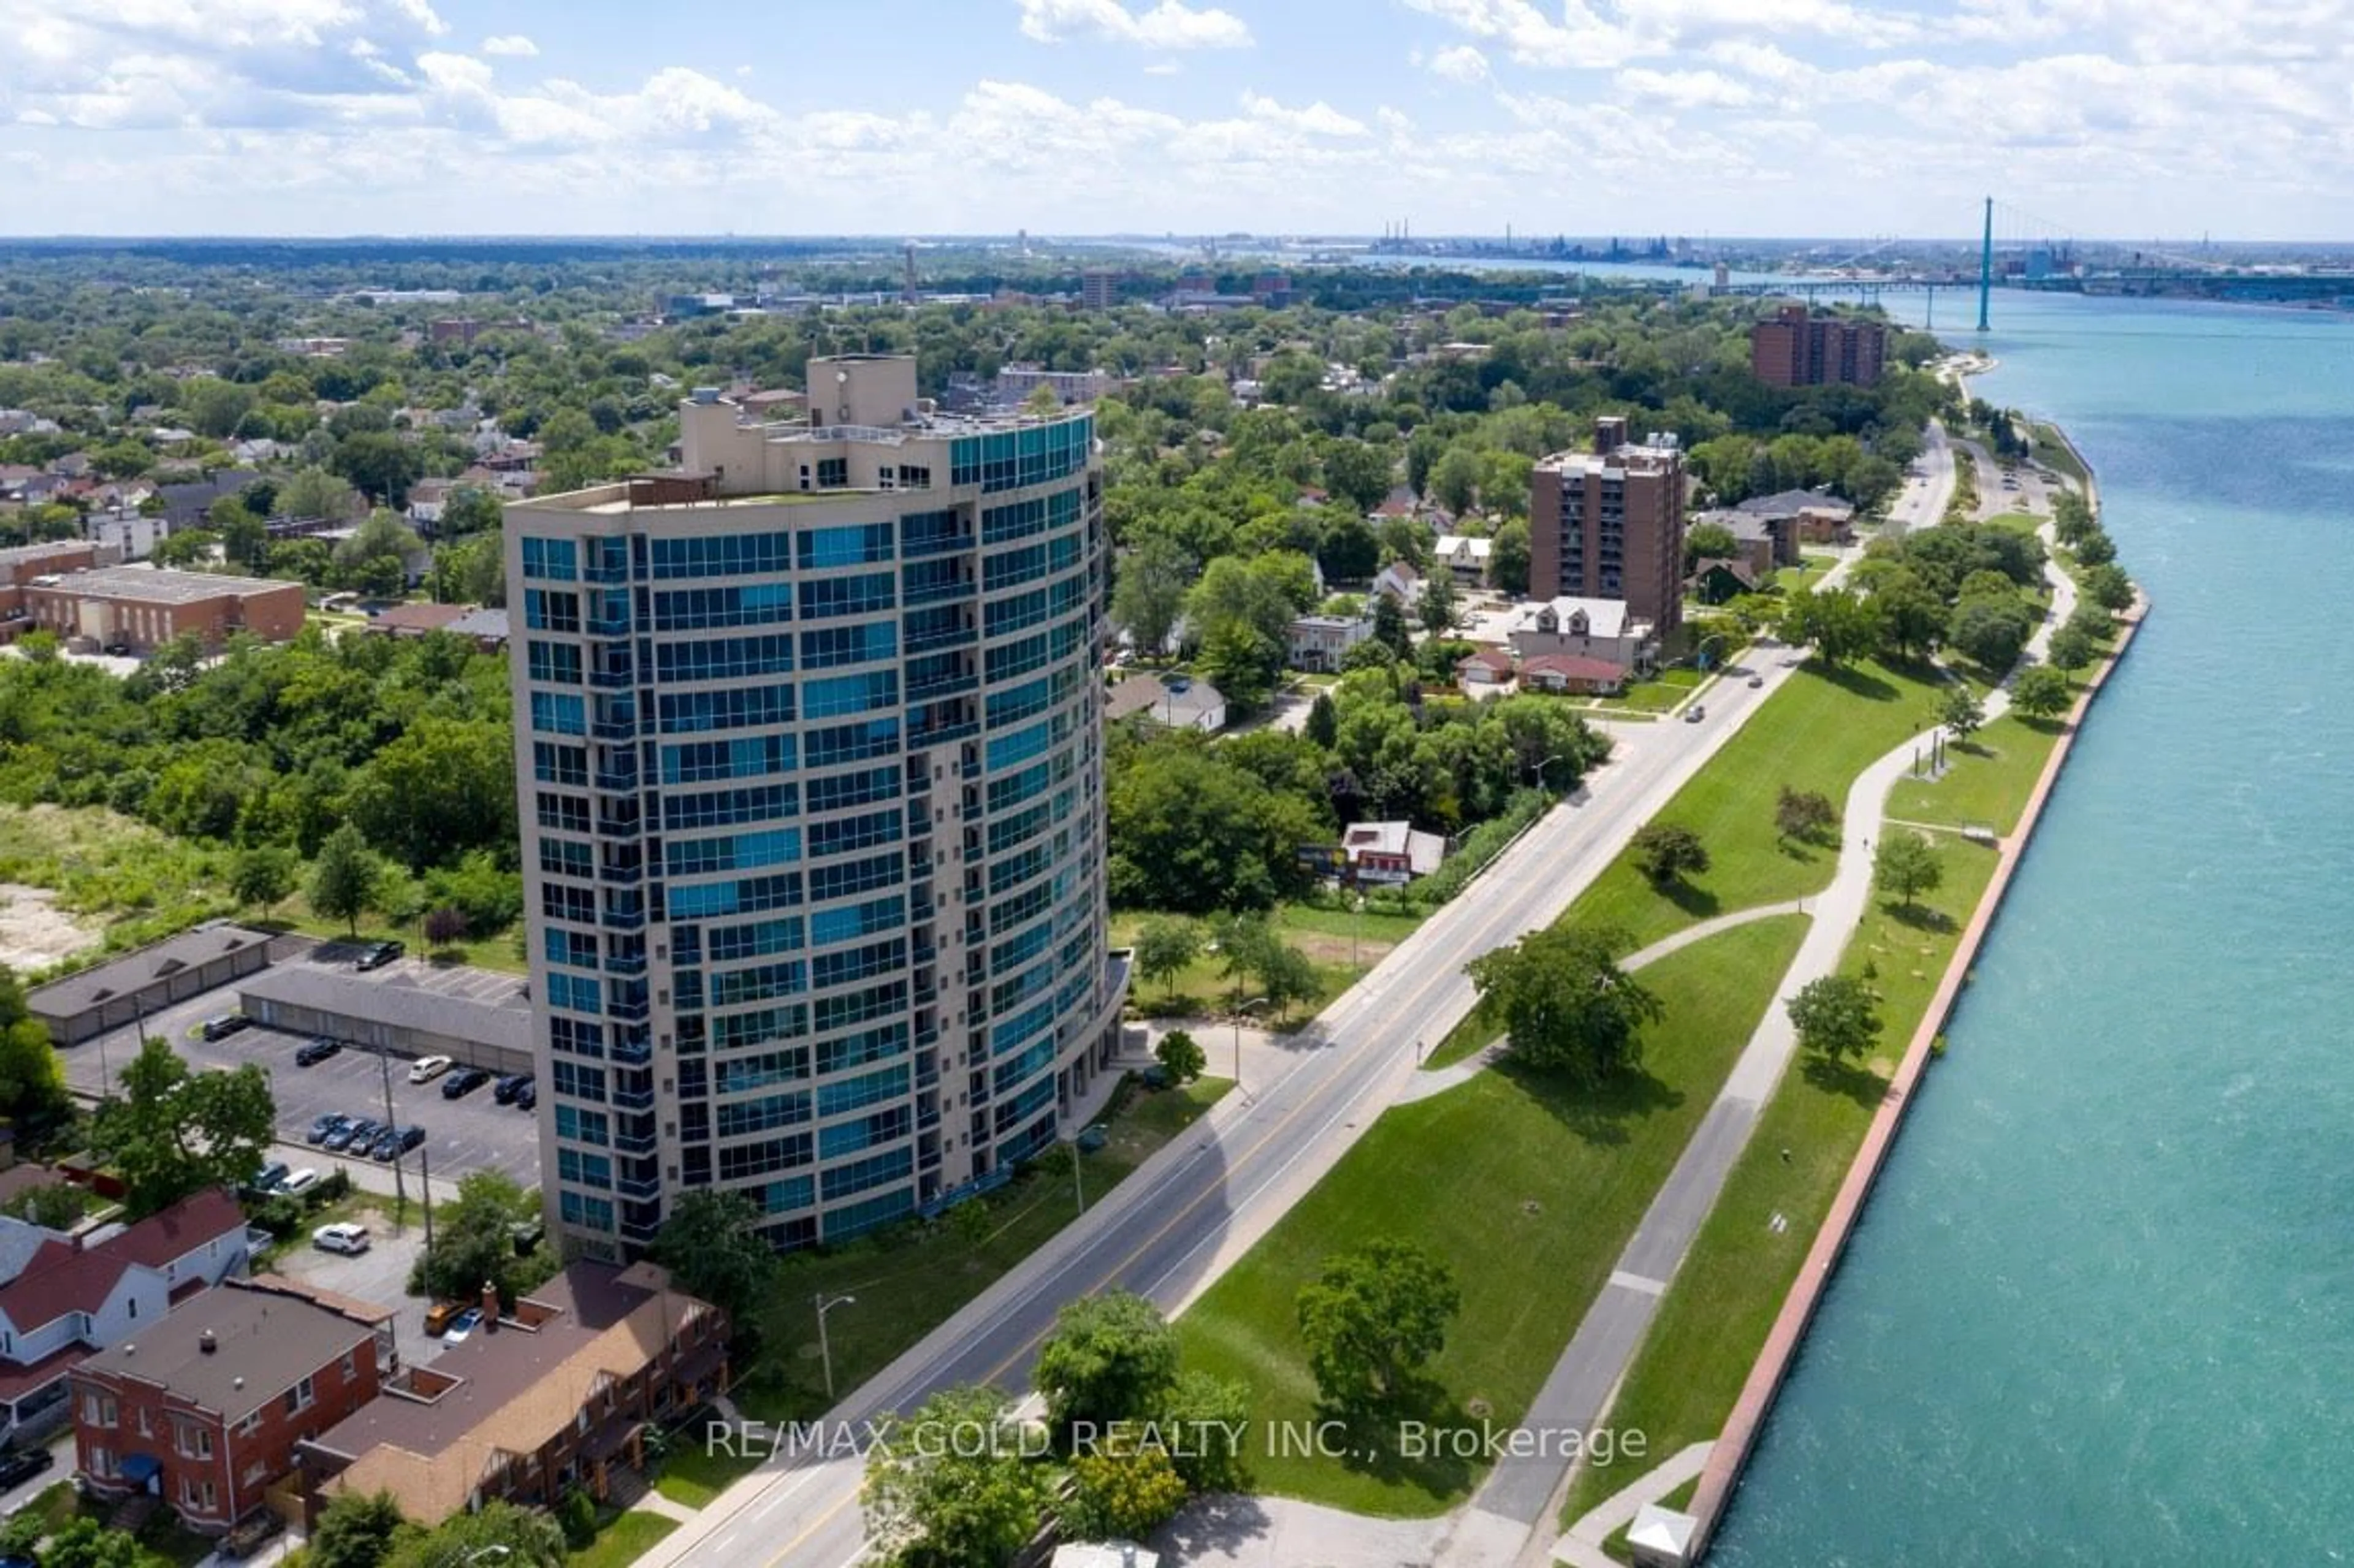 A pic from exterior of the house or condo for 1225 Riverside Dr #802, Windsor Ontario L6A 0M4